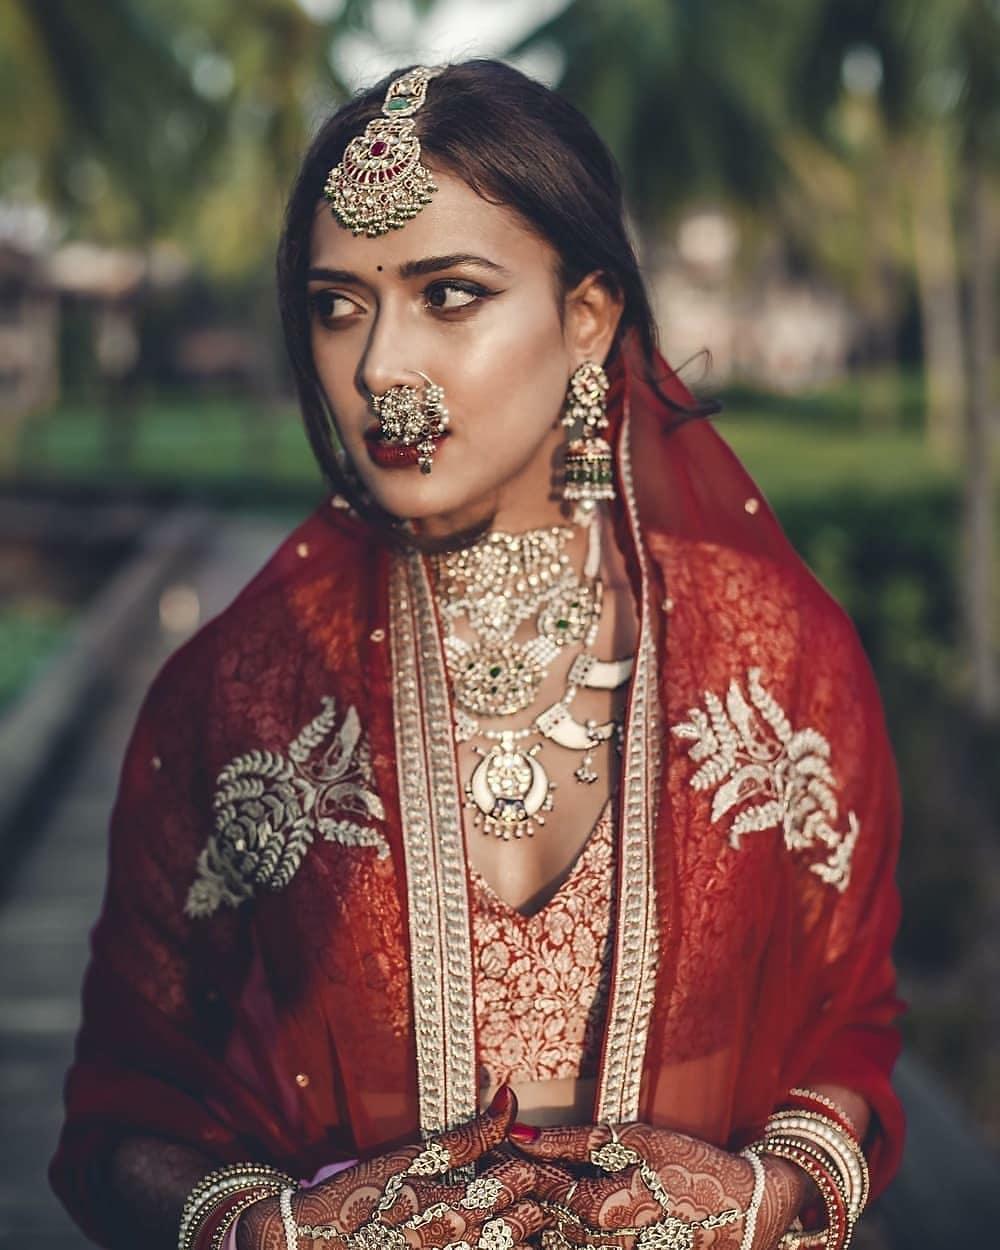 How to Wear Maang Tikka? Here is a Life-saving Guide for Brides